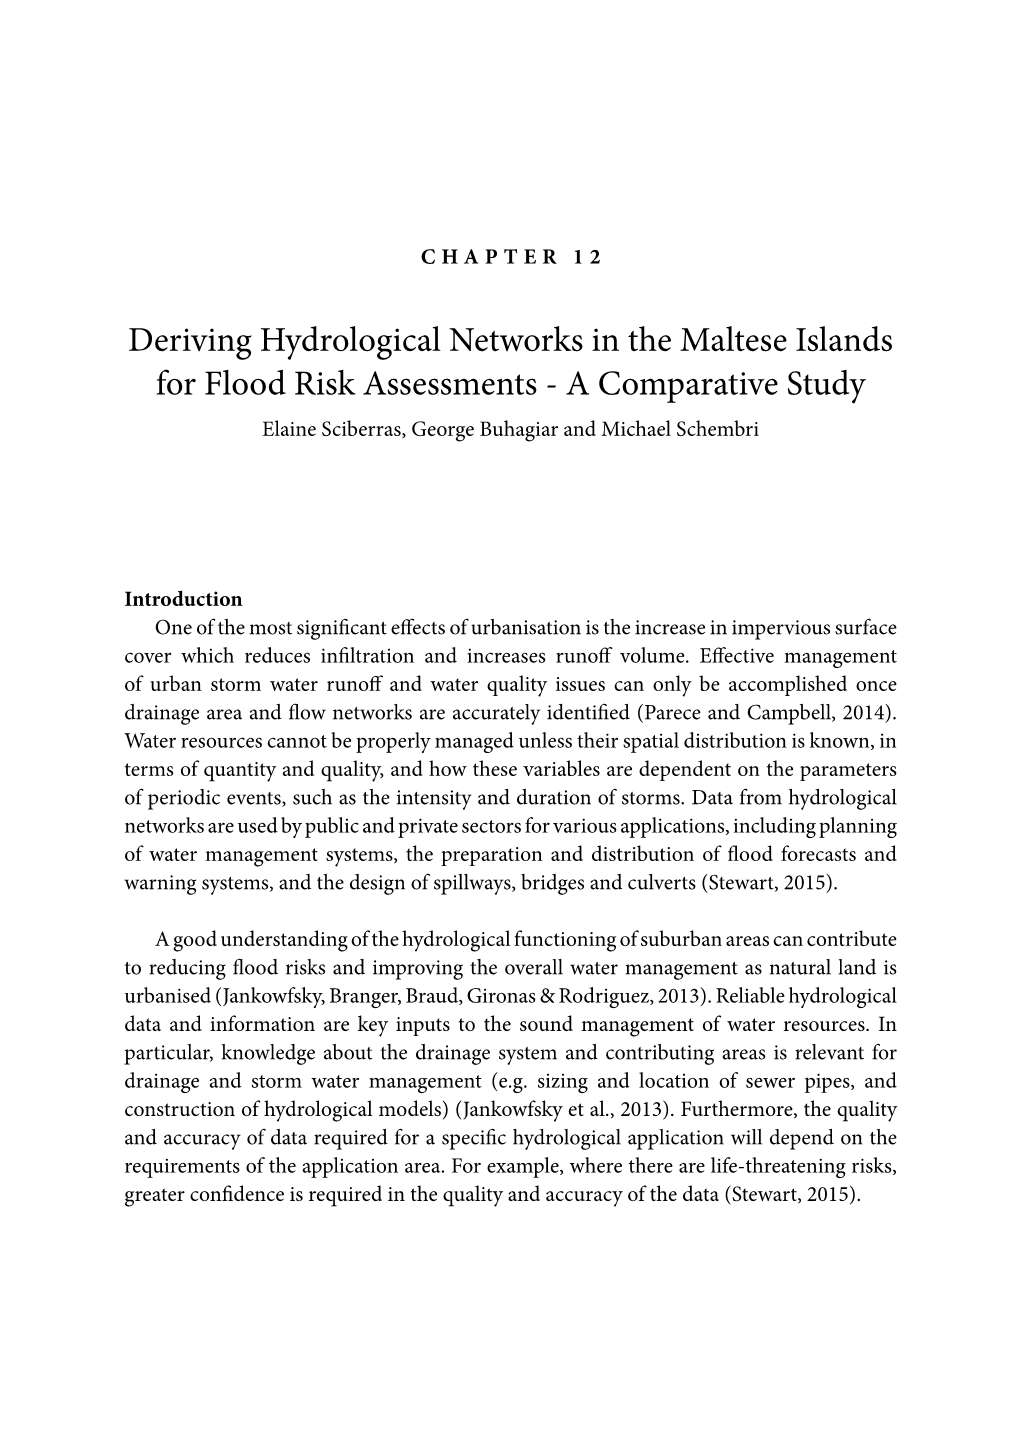 Deriving Hydrological Networks in the Maltese Islands for Flood Risk Assessments - a Comparative Study Elaine Sciberras, George Buhagiar and Michael Schembri